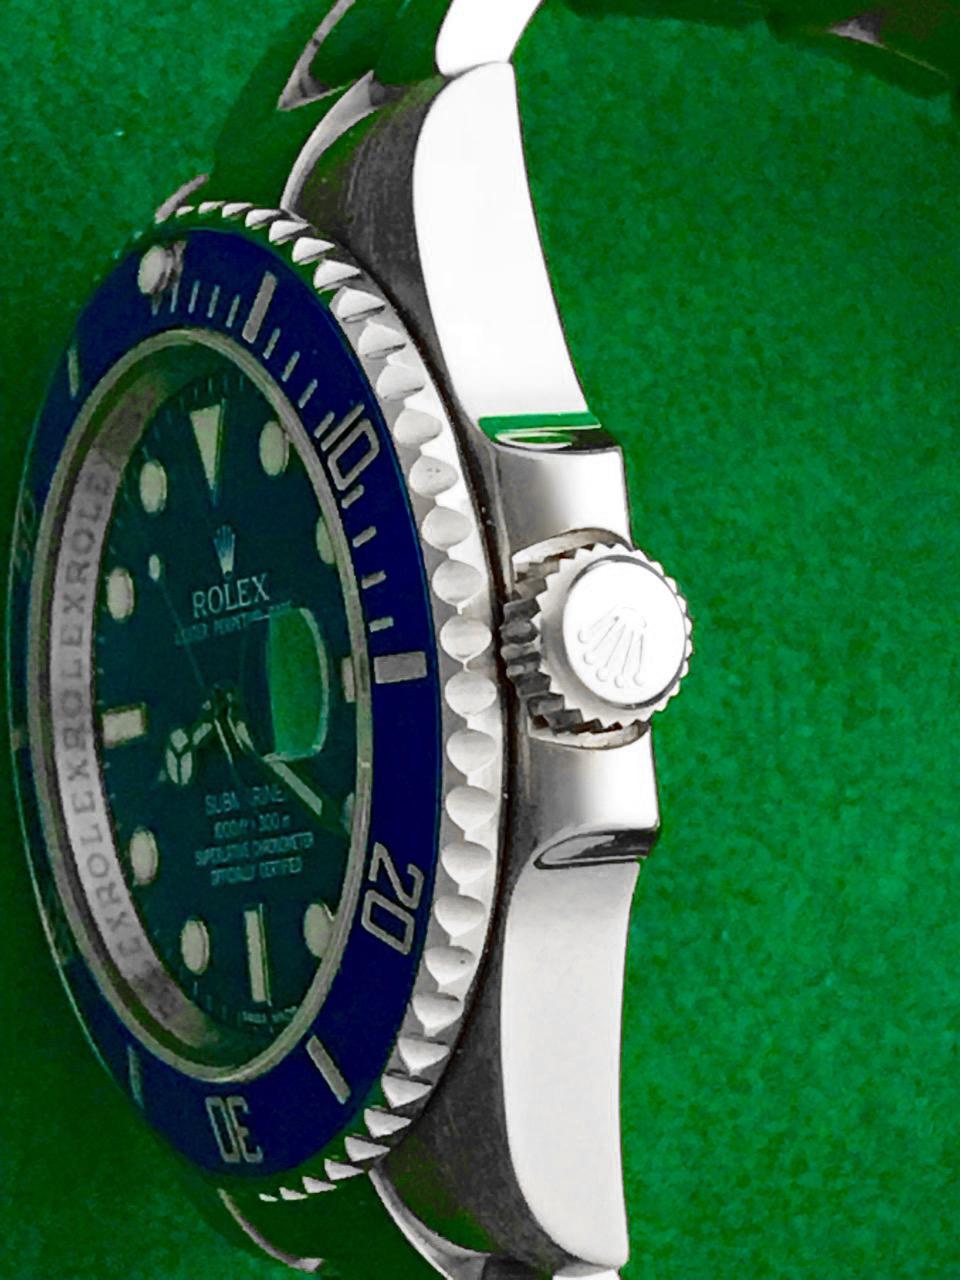 Stunning Rolex Mens 18k White Gold Blue Dial Blue Ceramic Bezel Submariner Model 116619.  Automatic Winding Oyster Perpetual Date Movement.  Features an 18k White Gold case with Blue Ceramic Bezel, diameter 41mm. 18k White Gold Oyster bracelet with